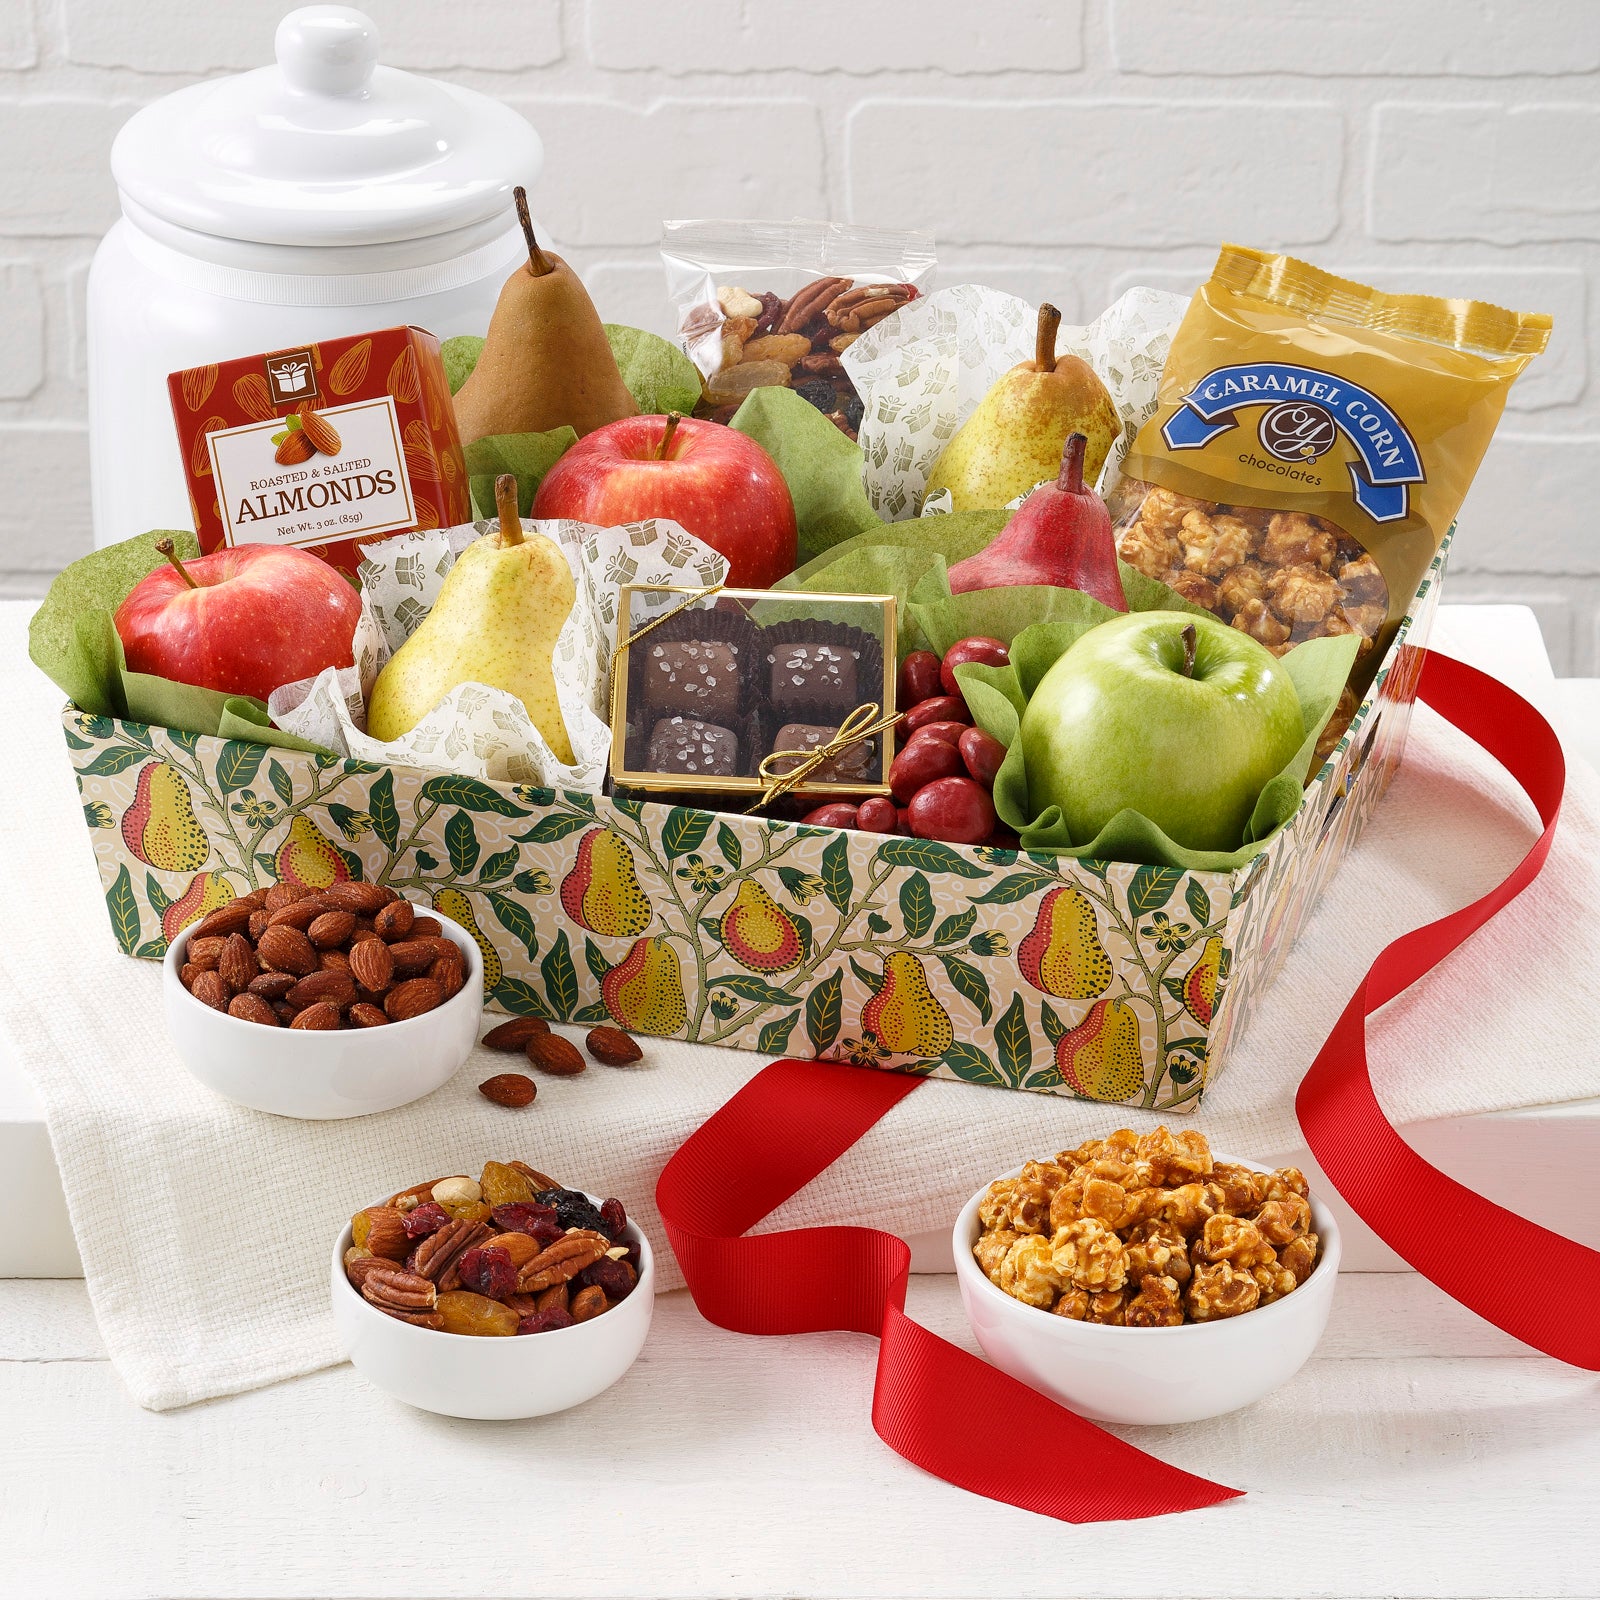 A gift basket decorated with pears and filed with an assortment of fruit and snacks